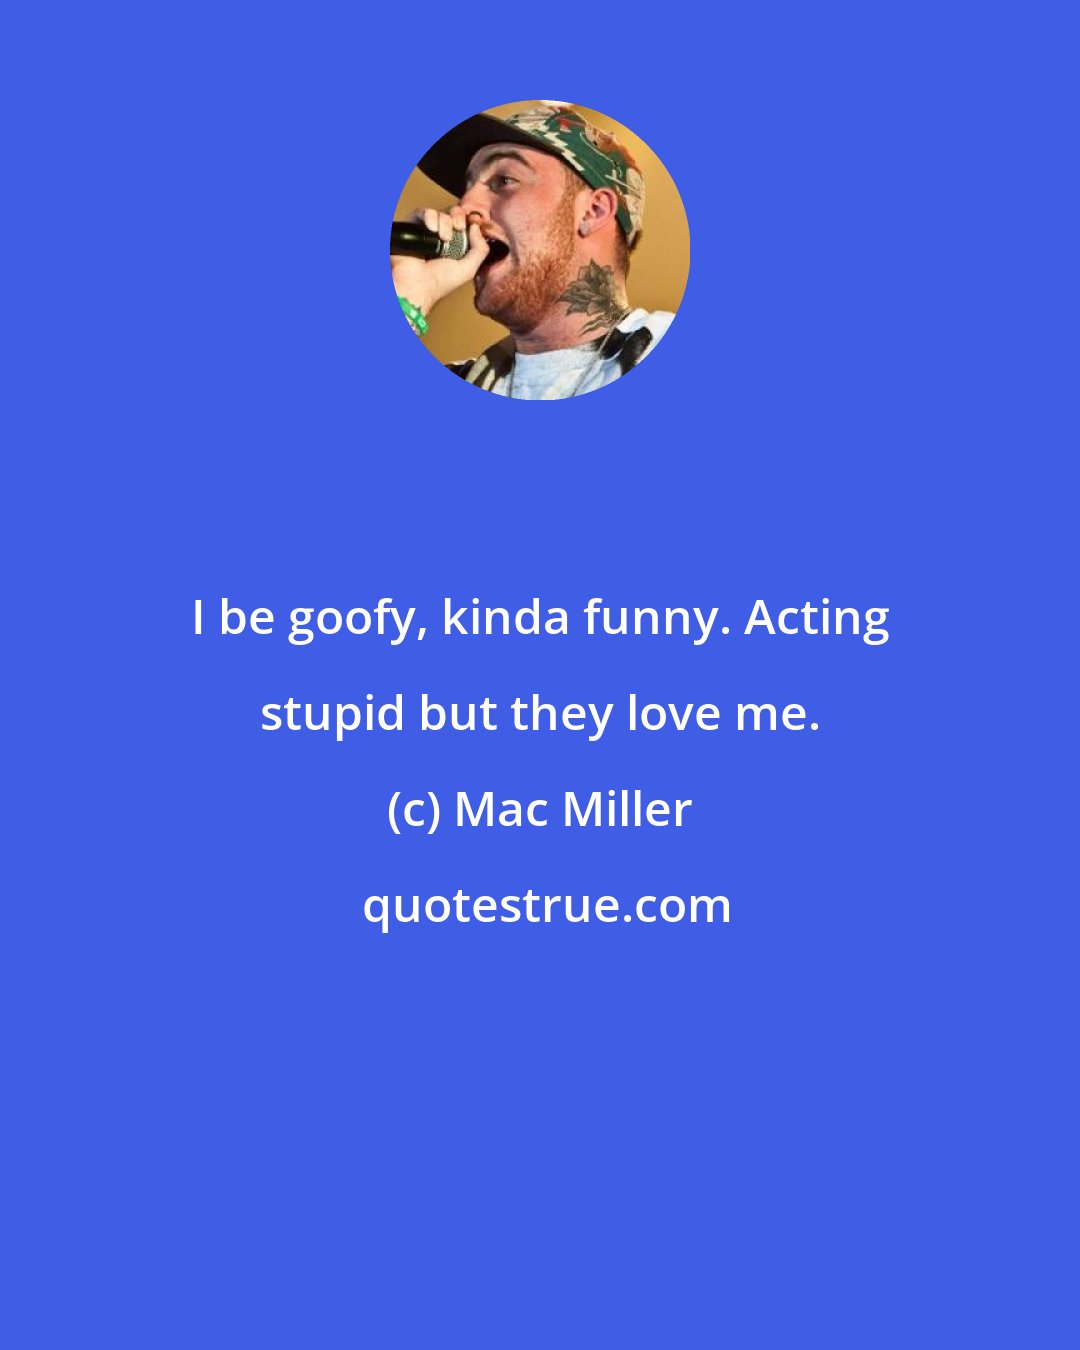 Mac Miller: I be goofy, kinda funny. Acting stupid but they love me.